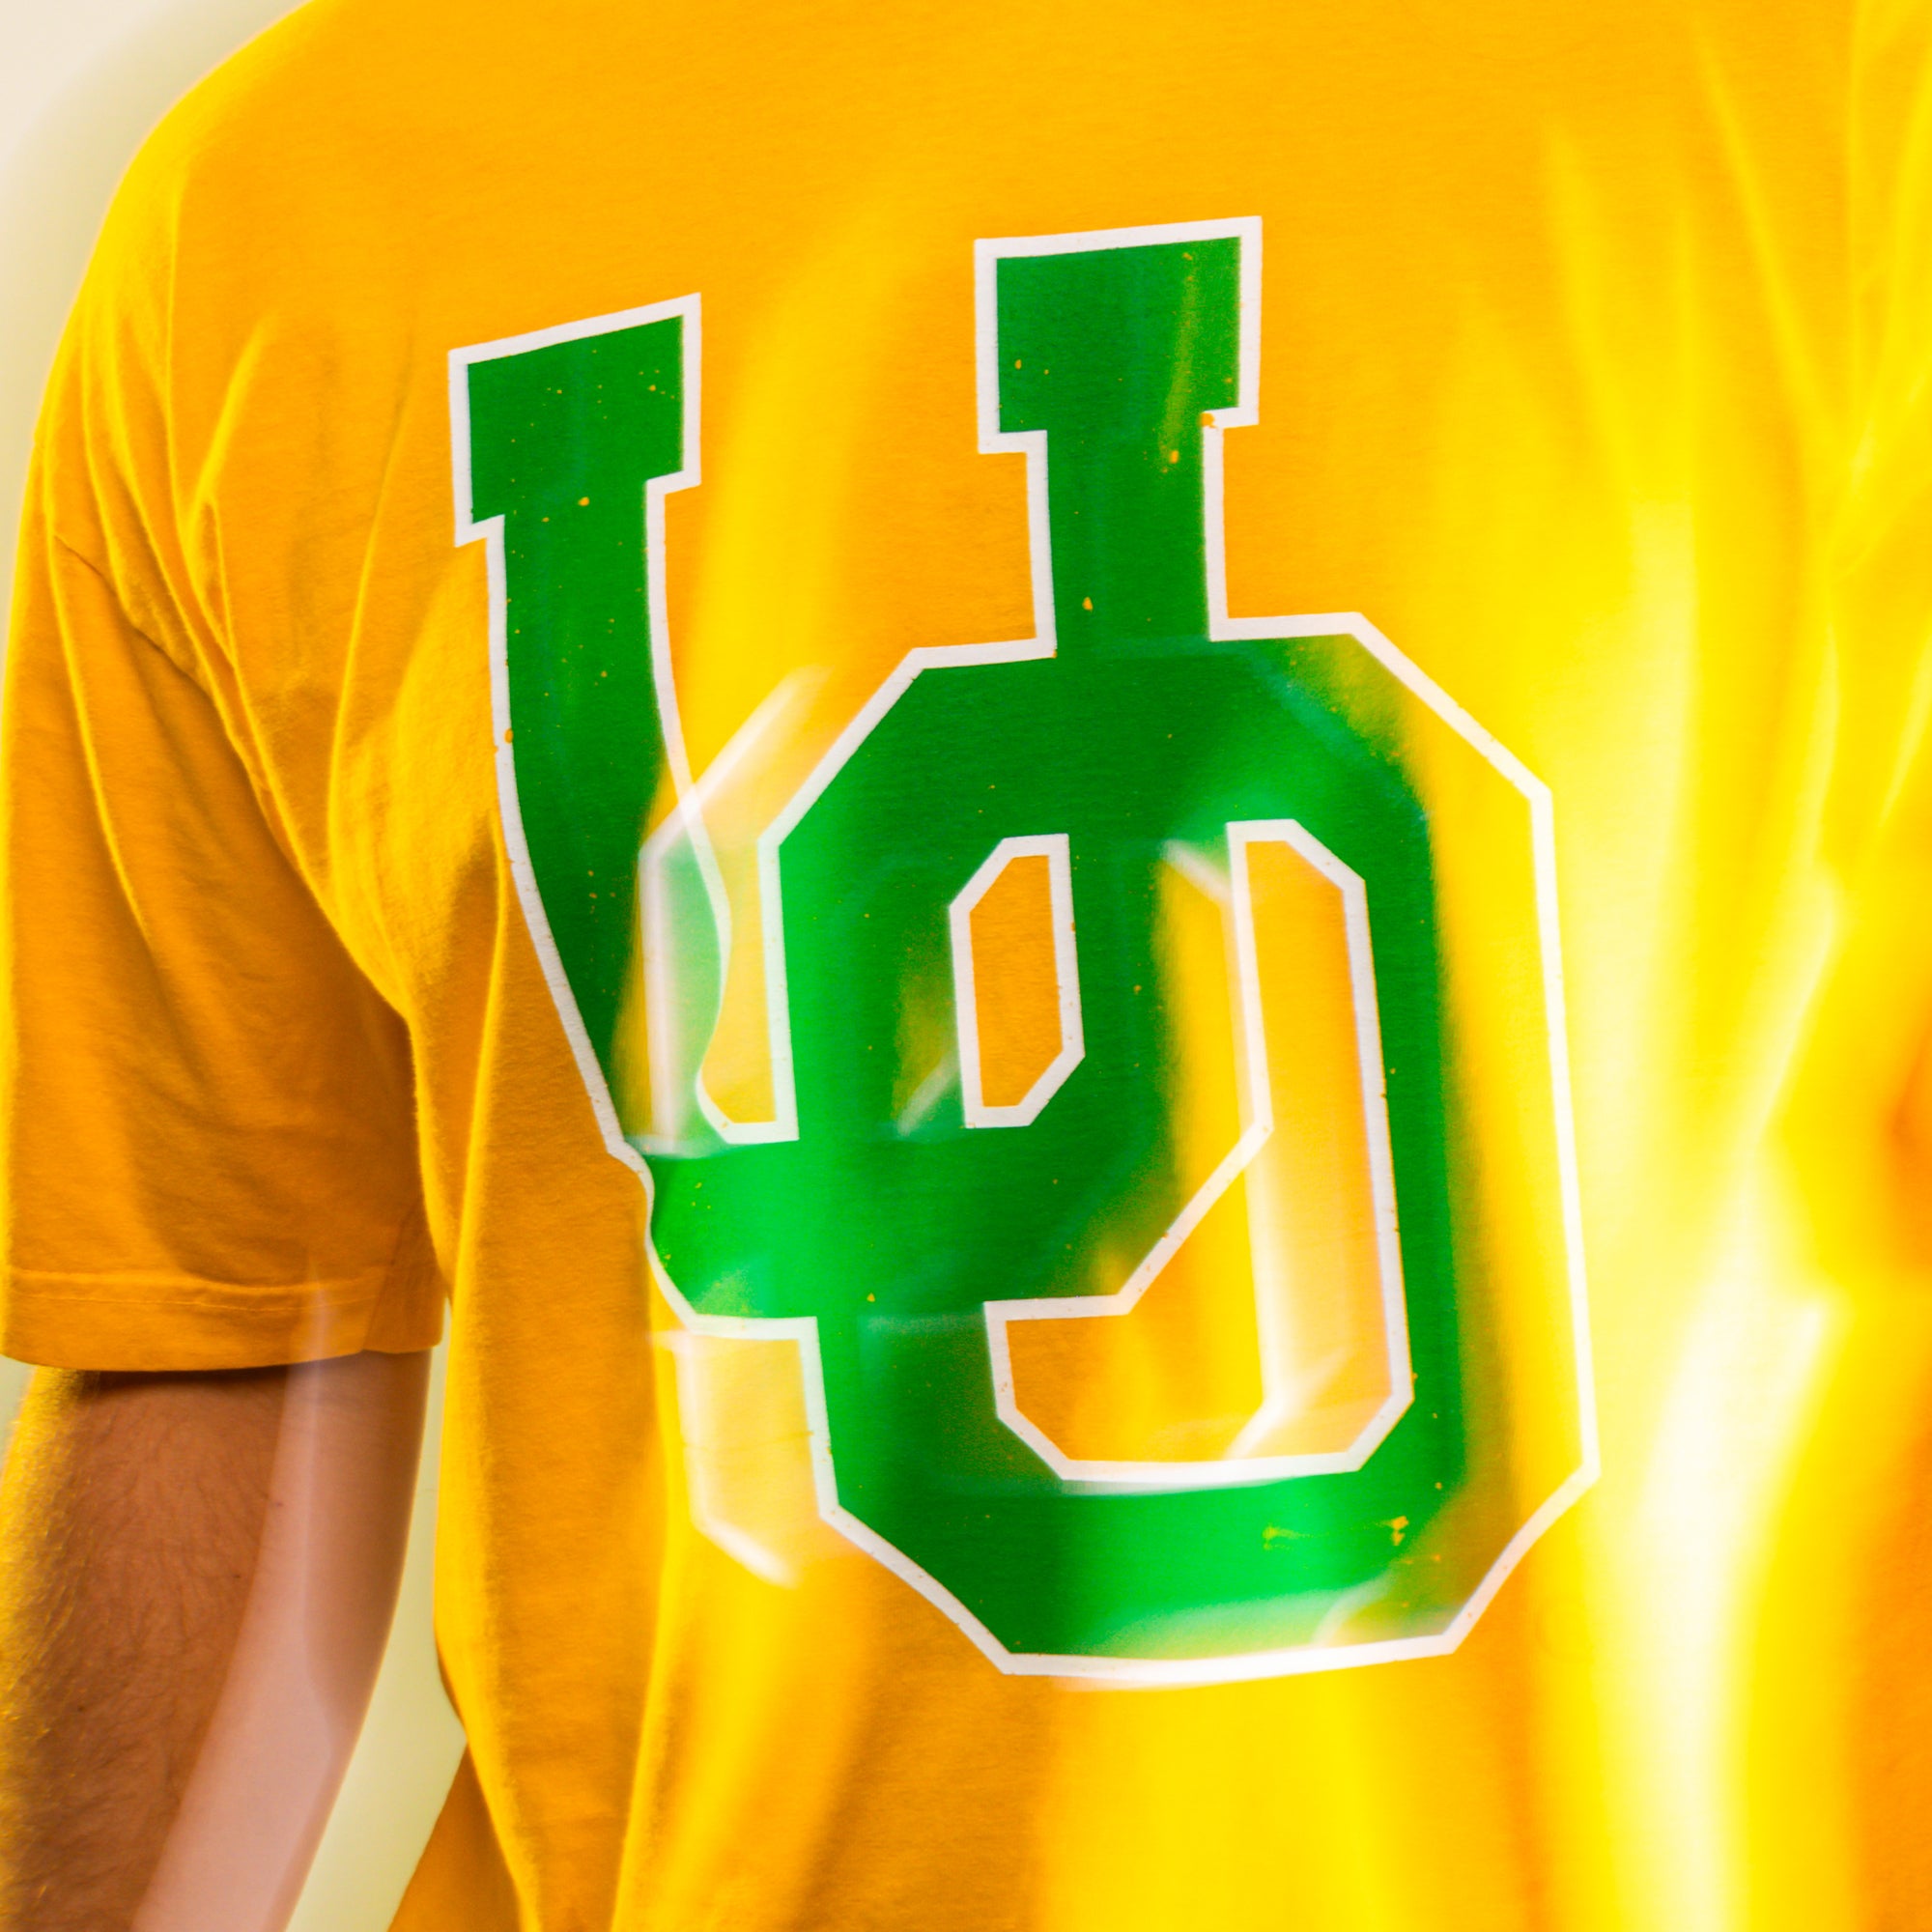 All-American UO Tee